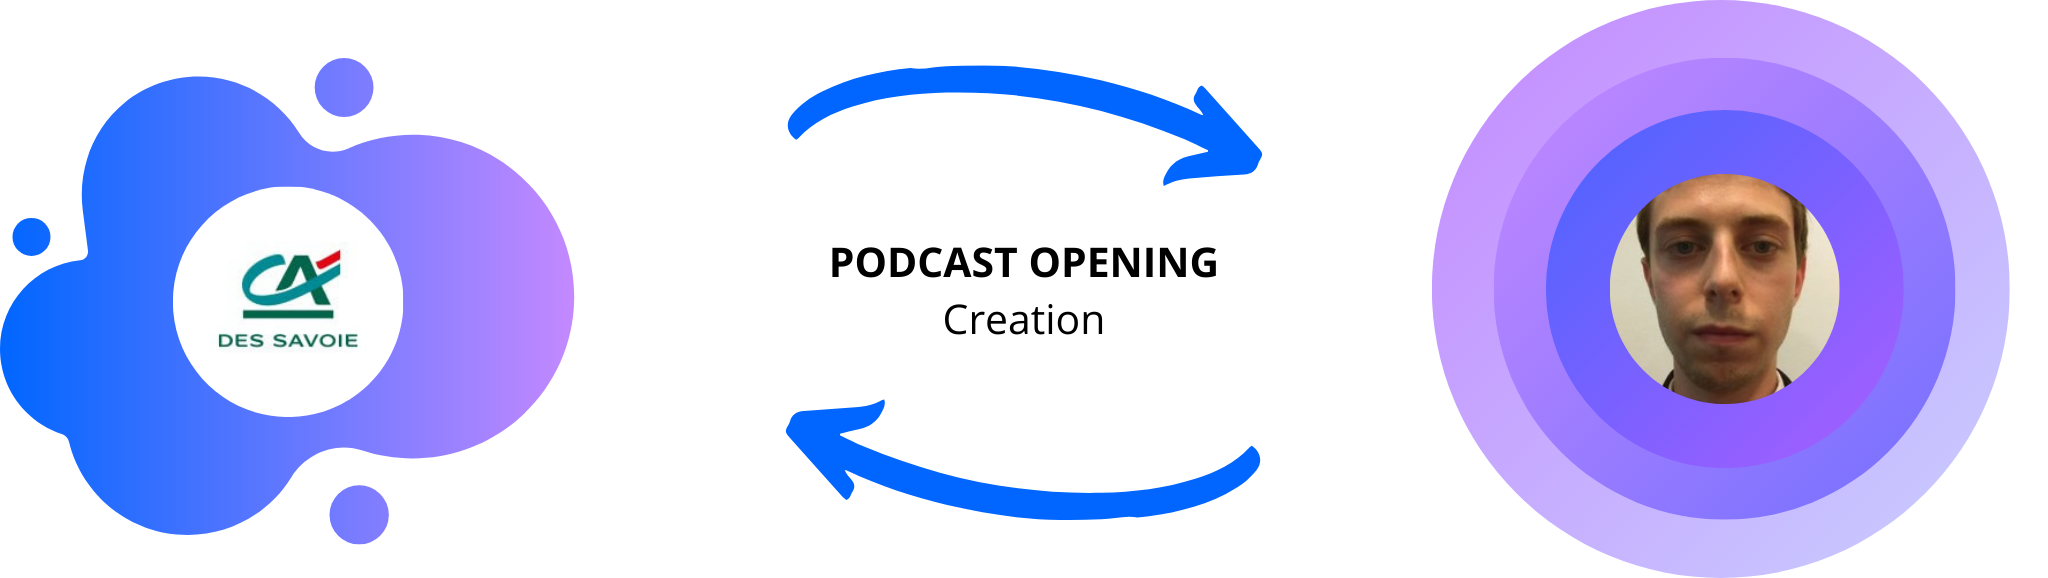 Podcast Opening Creation for Credit Agricole